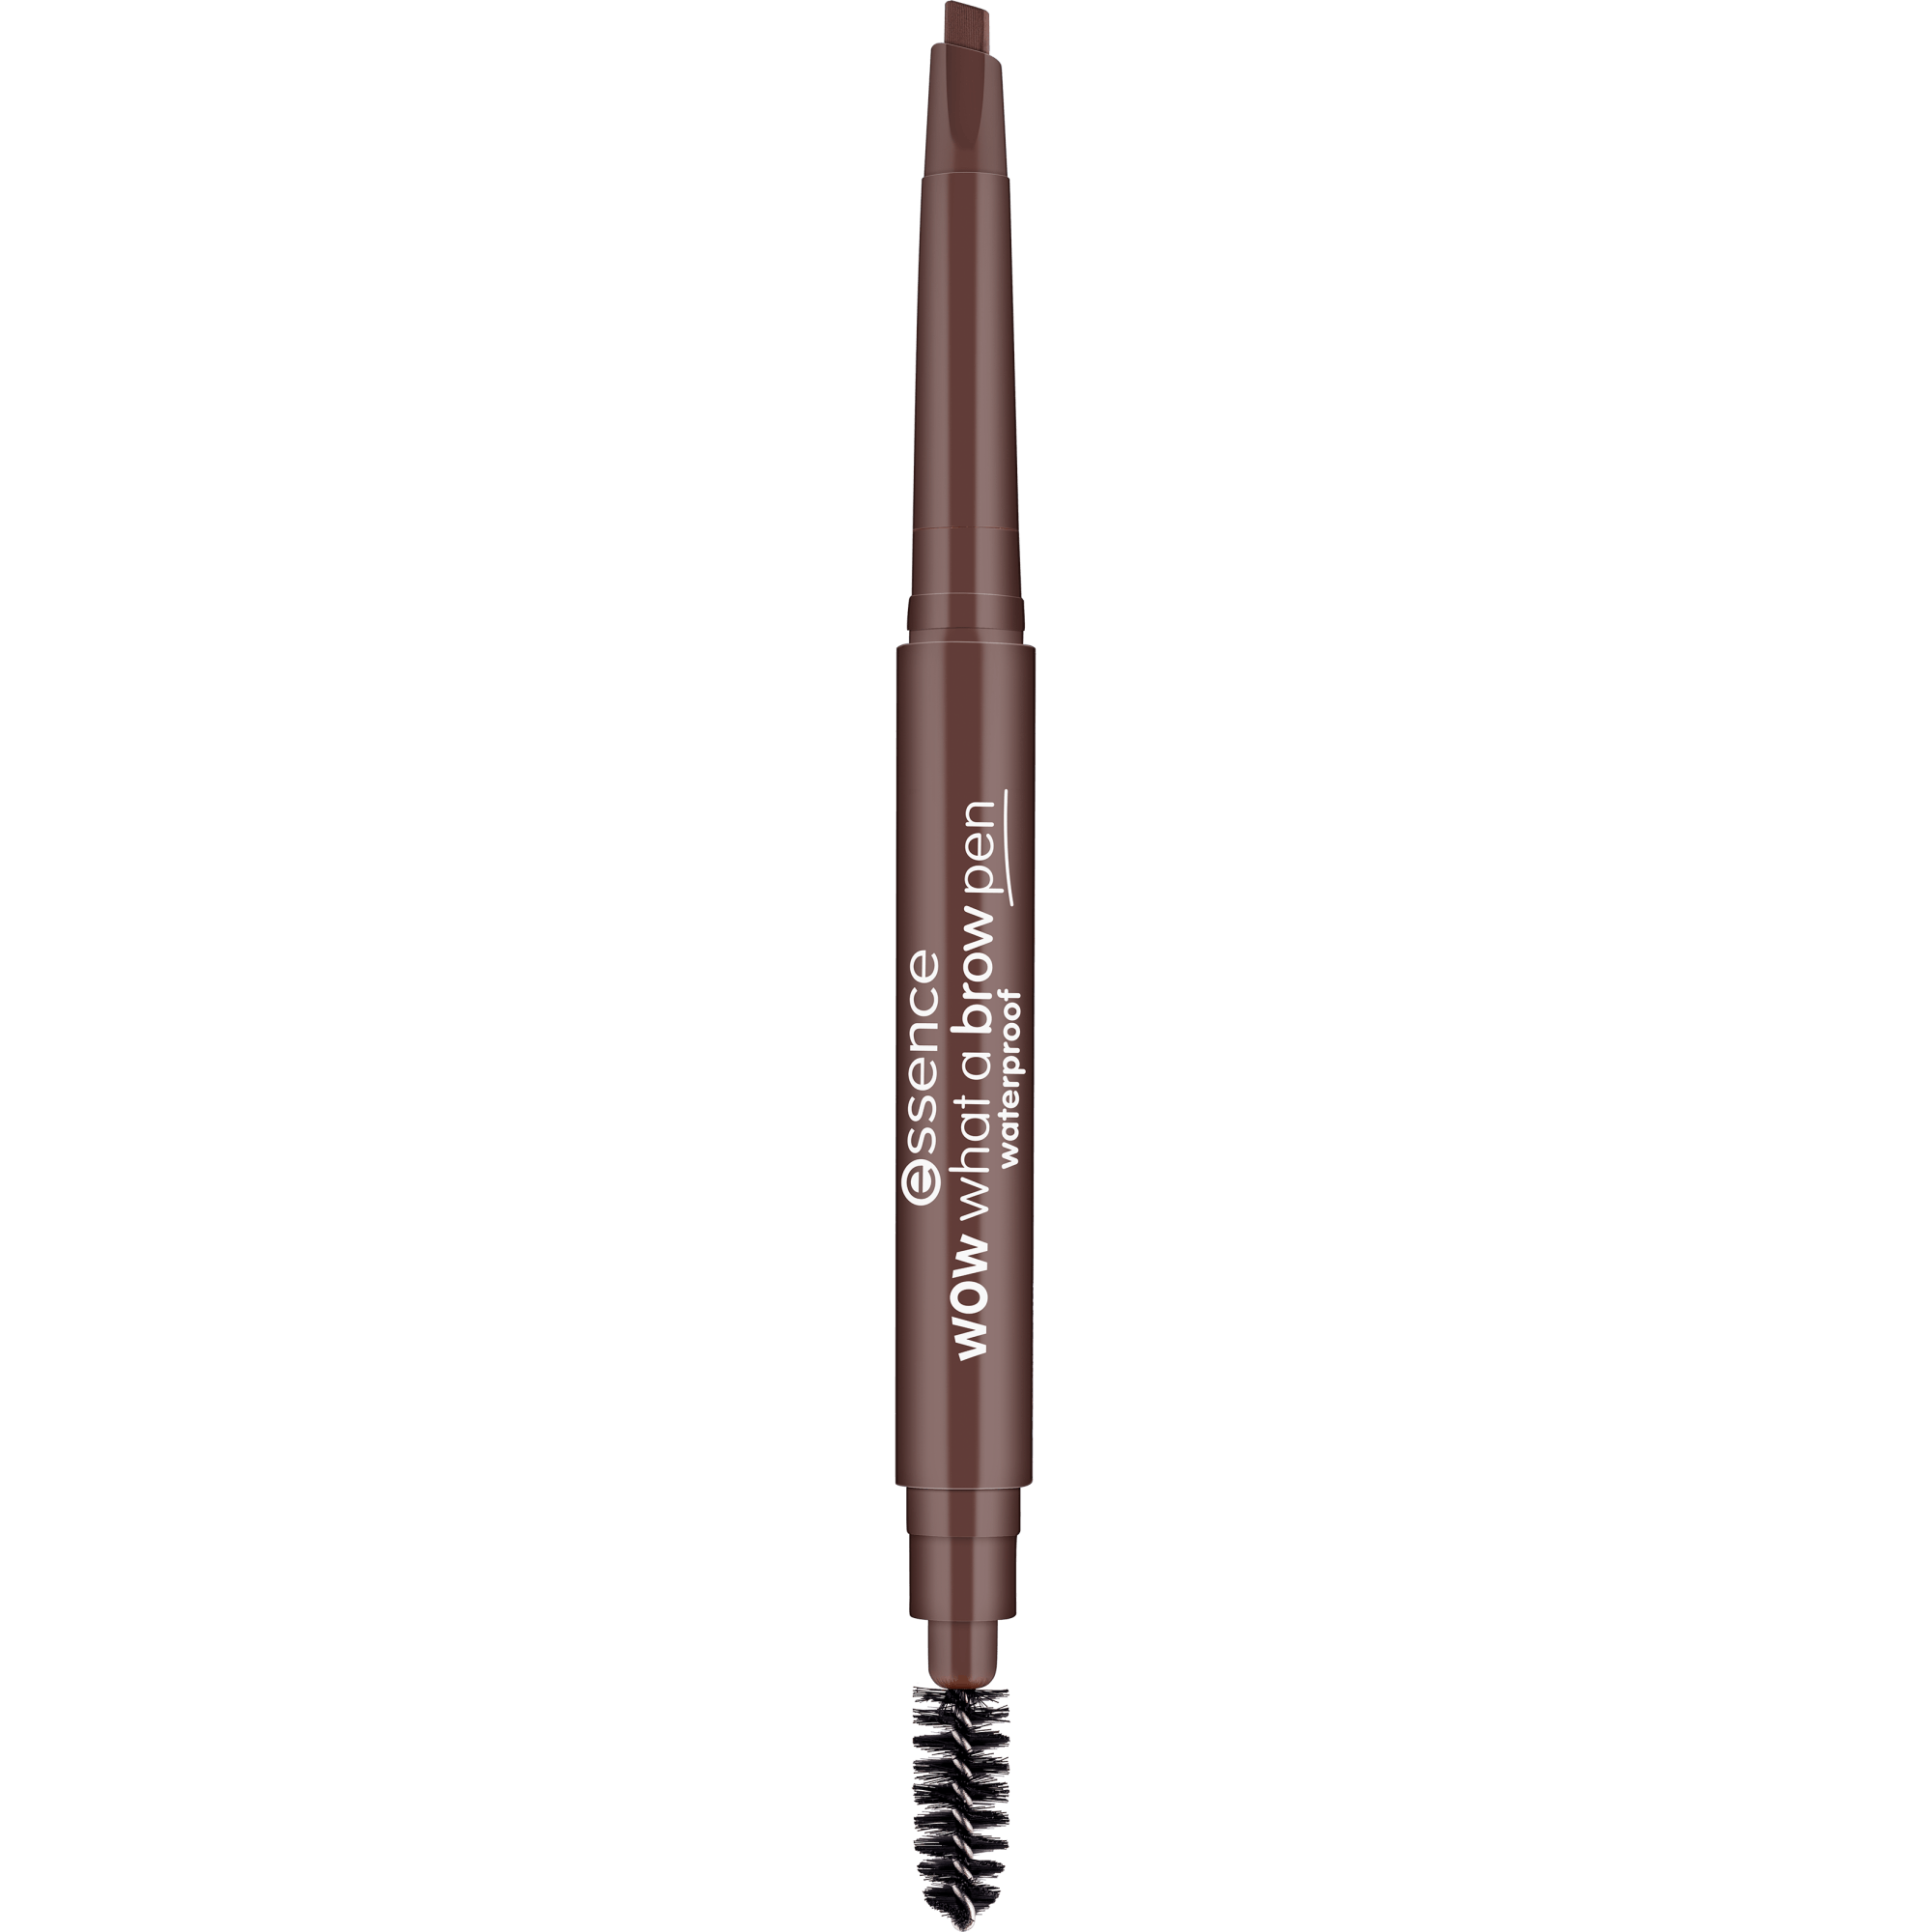 Essence WOW What A Brow Pen Waterproof 02 Brown 0,2 g